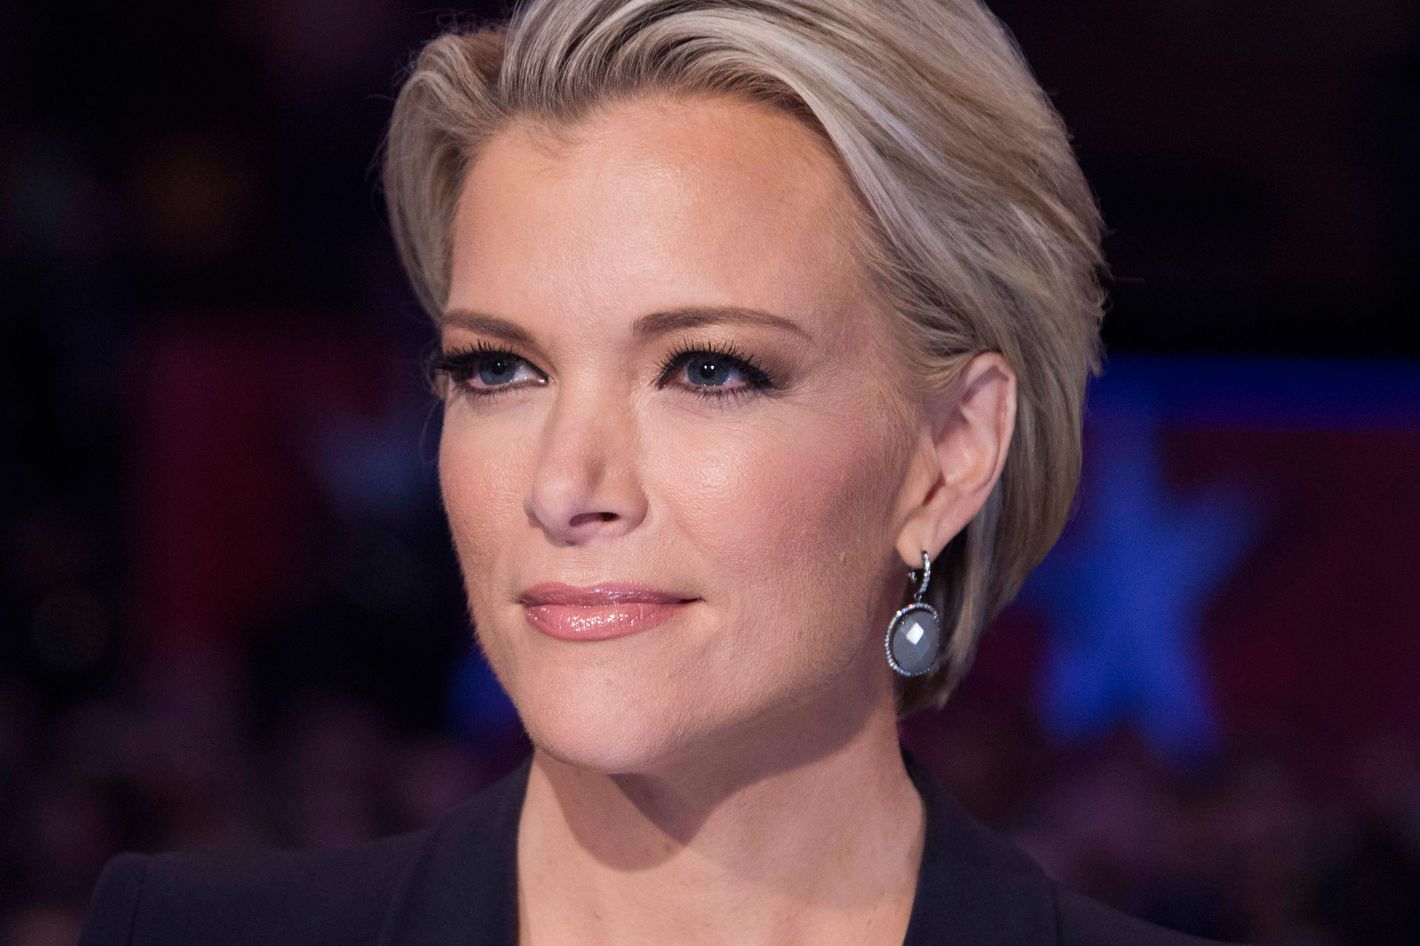 Men On Twitter Whined About Megyn Kellys Hair Last Night